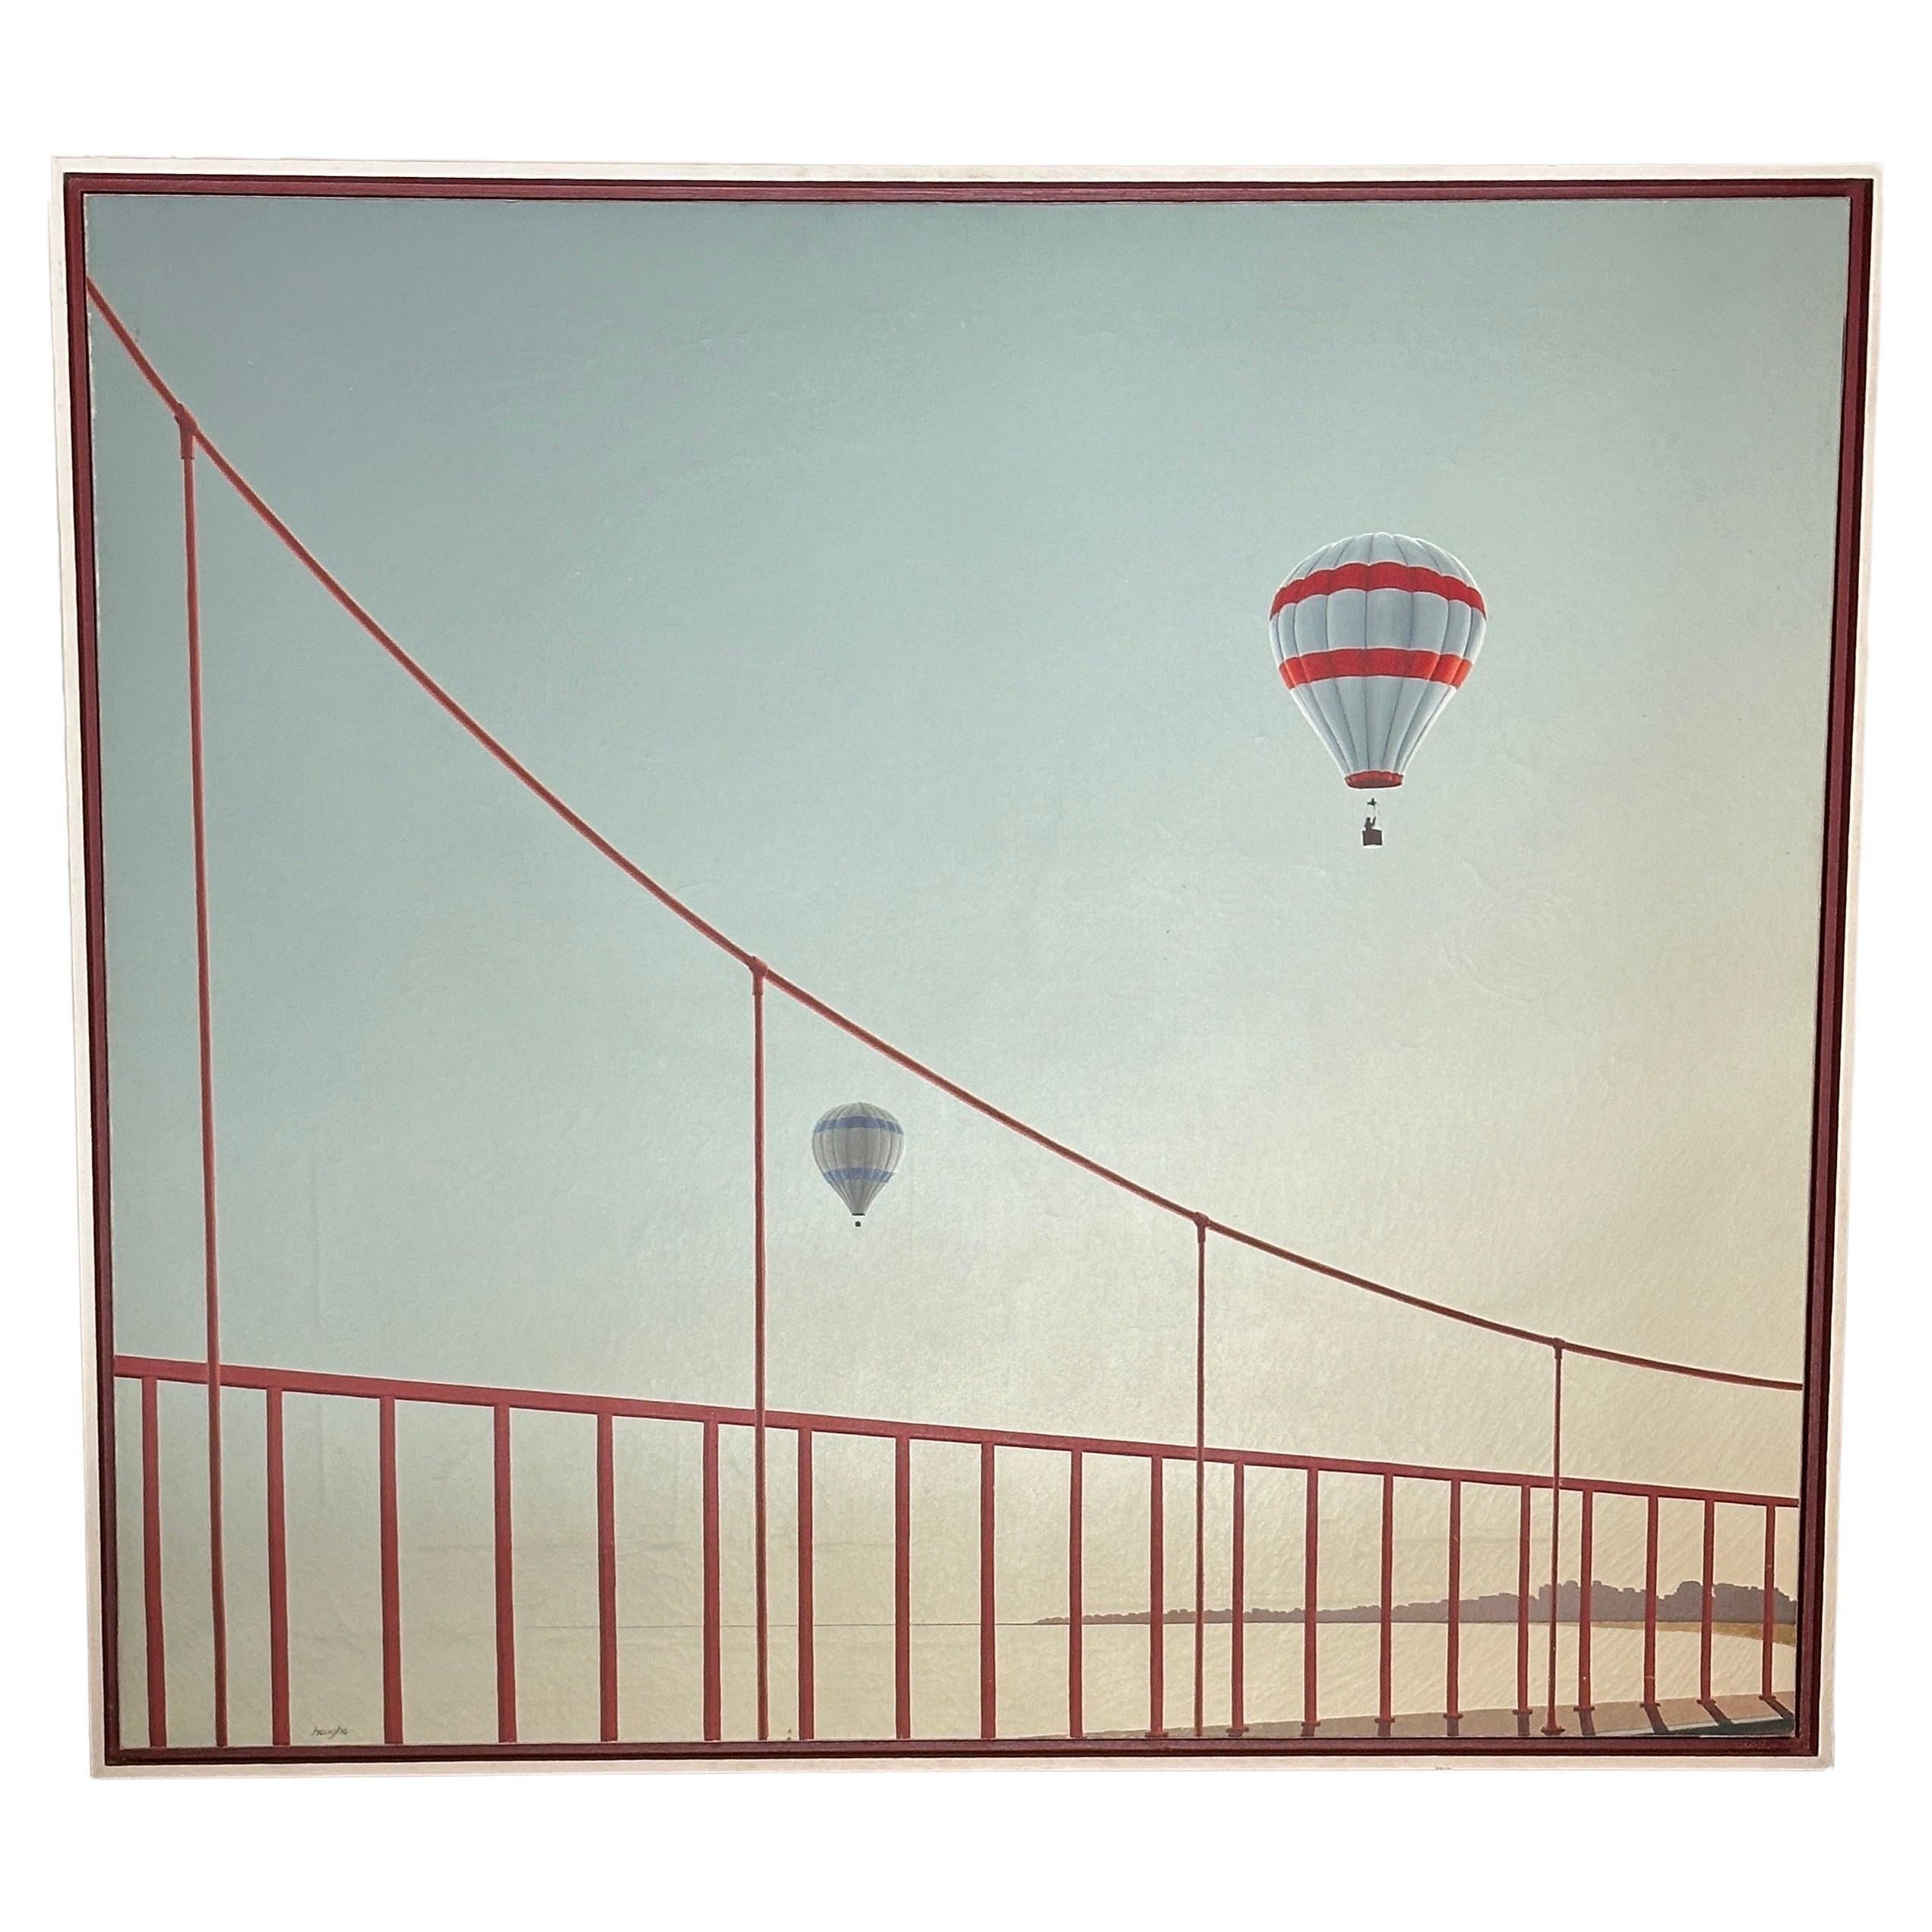 This painting by Patrick Heughe depicts a view of two hot-air balloons floating above the iconic San Francisco bridge. With meticulous attention to detail, Heughe captures the essence of a moment suspended in time, where the bridge meets the